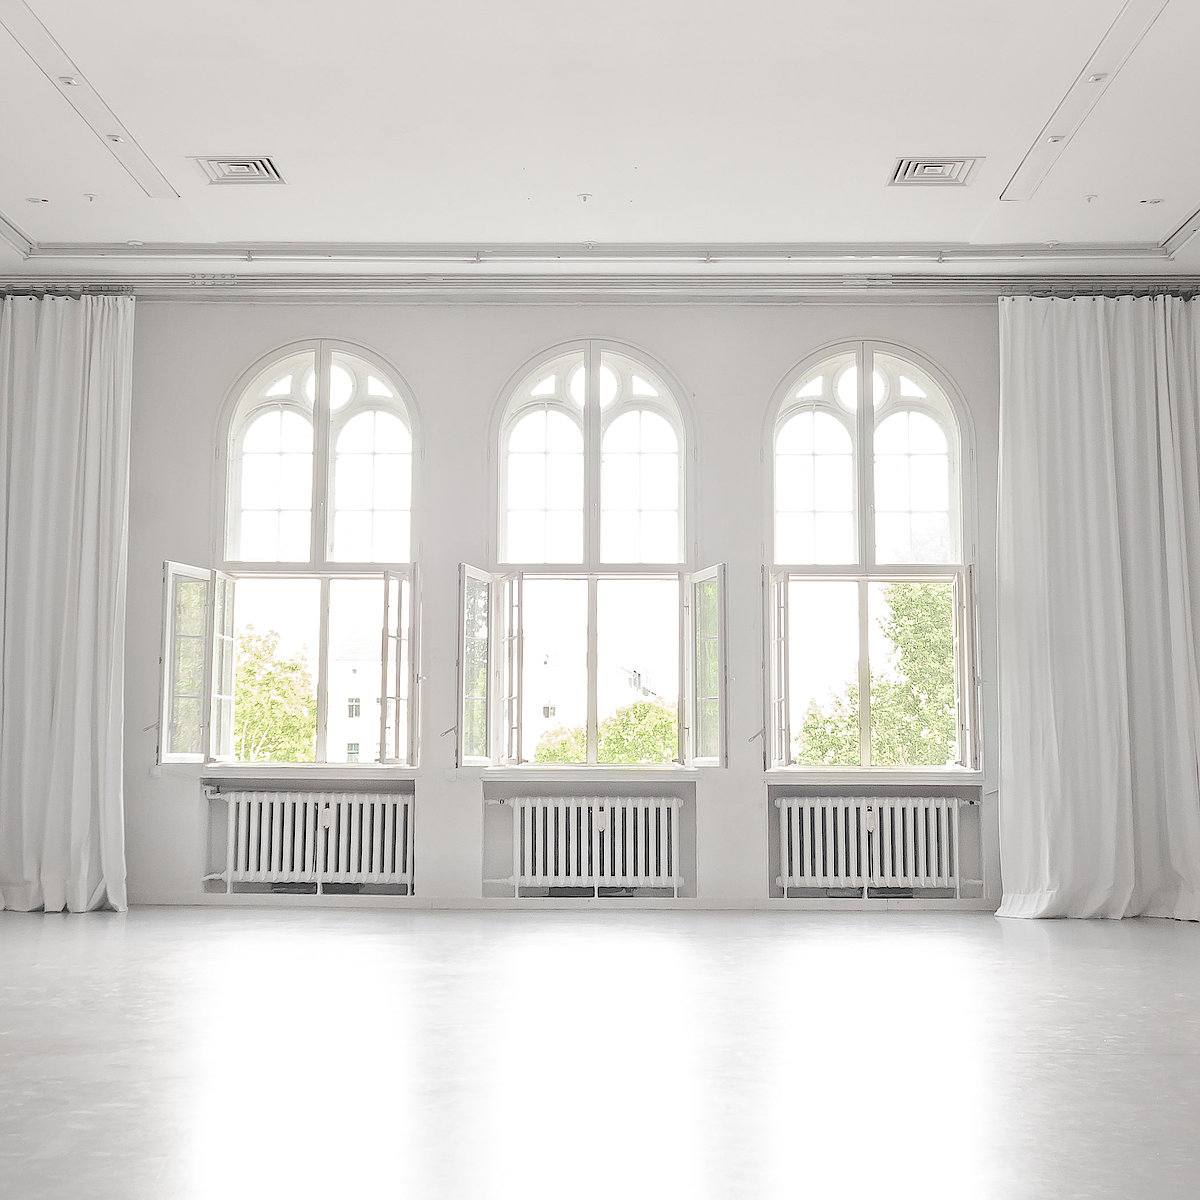 A picture of the studio.The walls, floor and curtains are white. The windows are open.